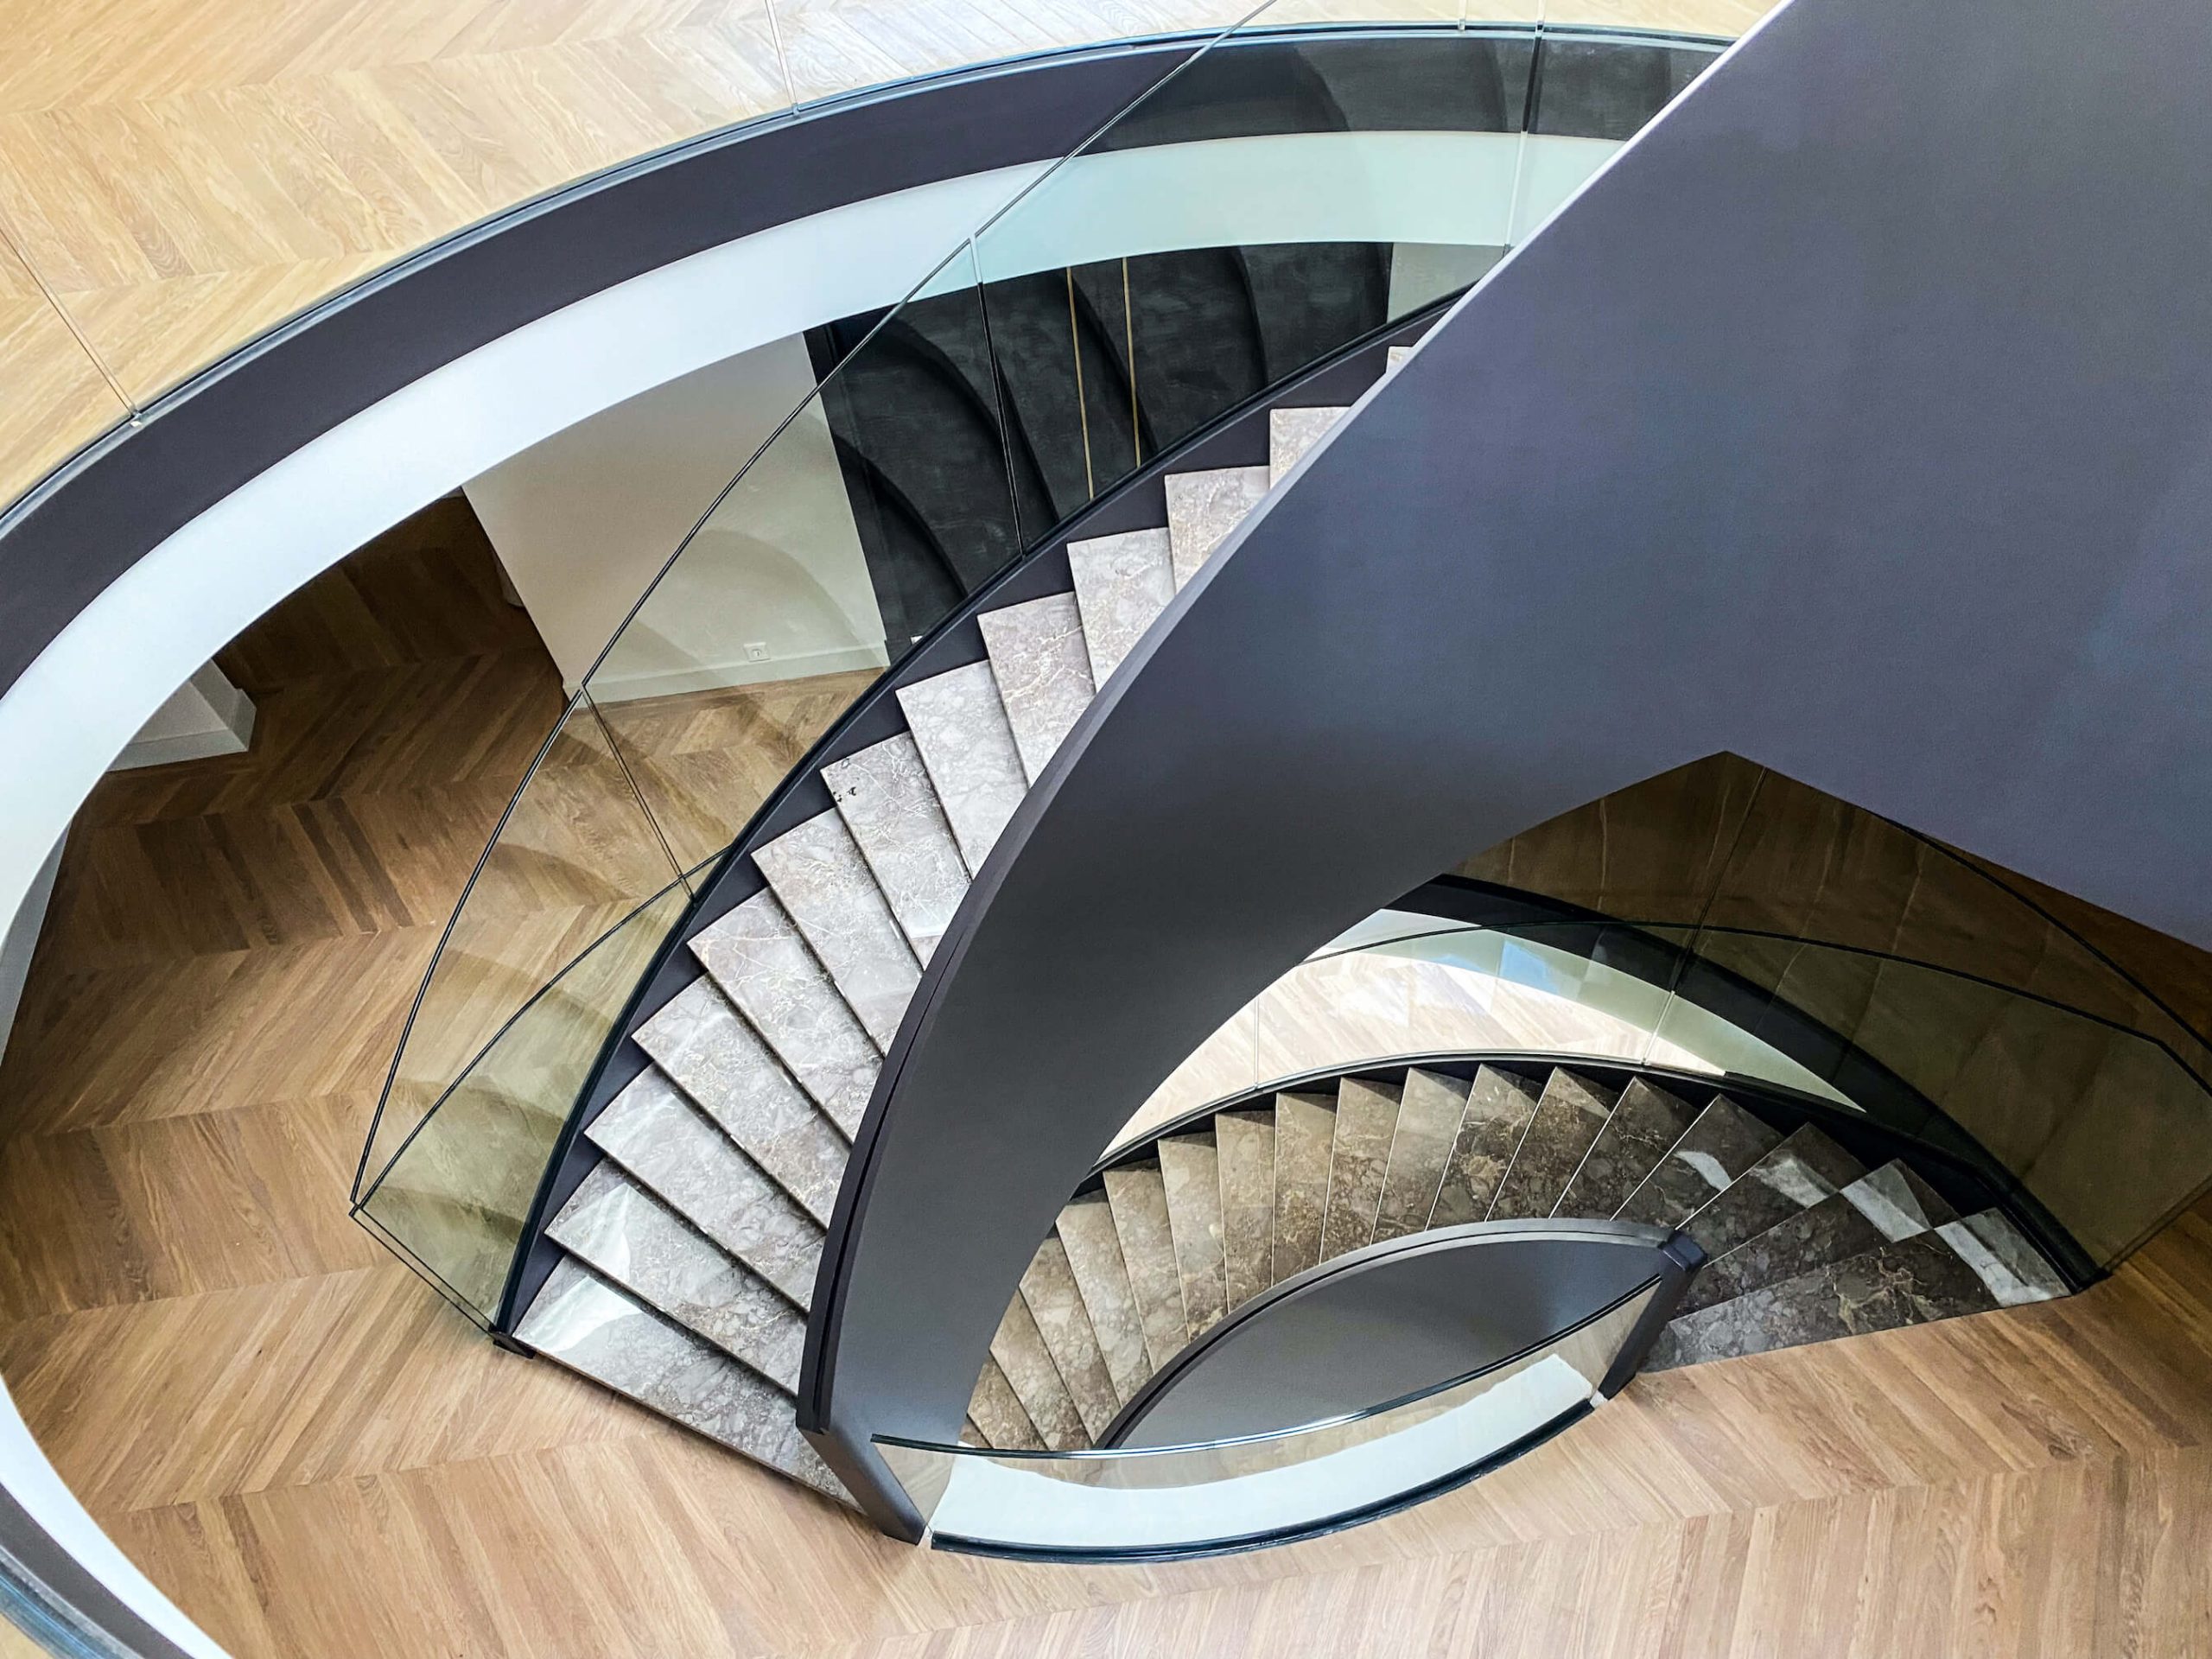 Steel spiral staircases with glass